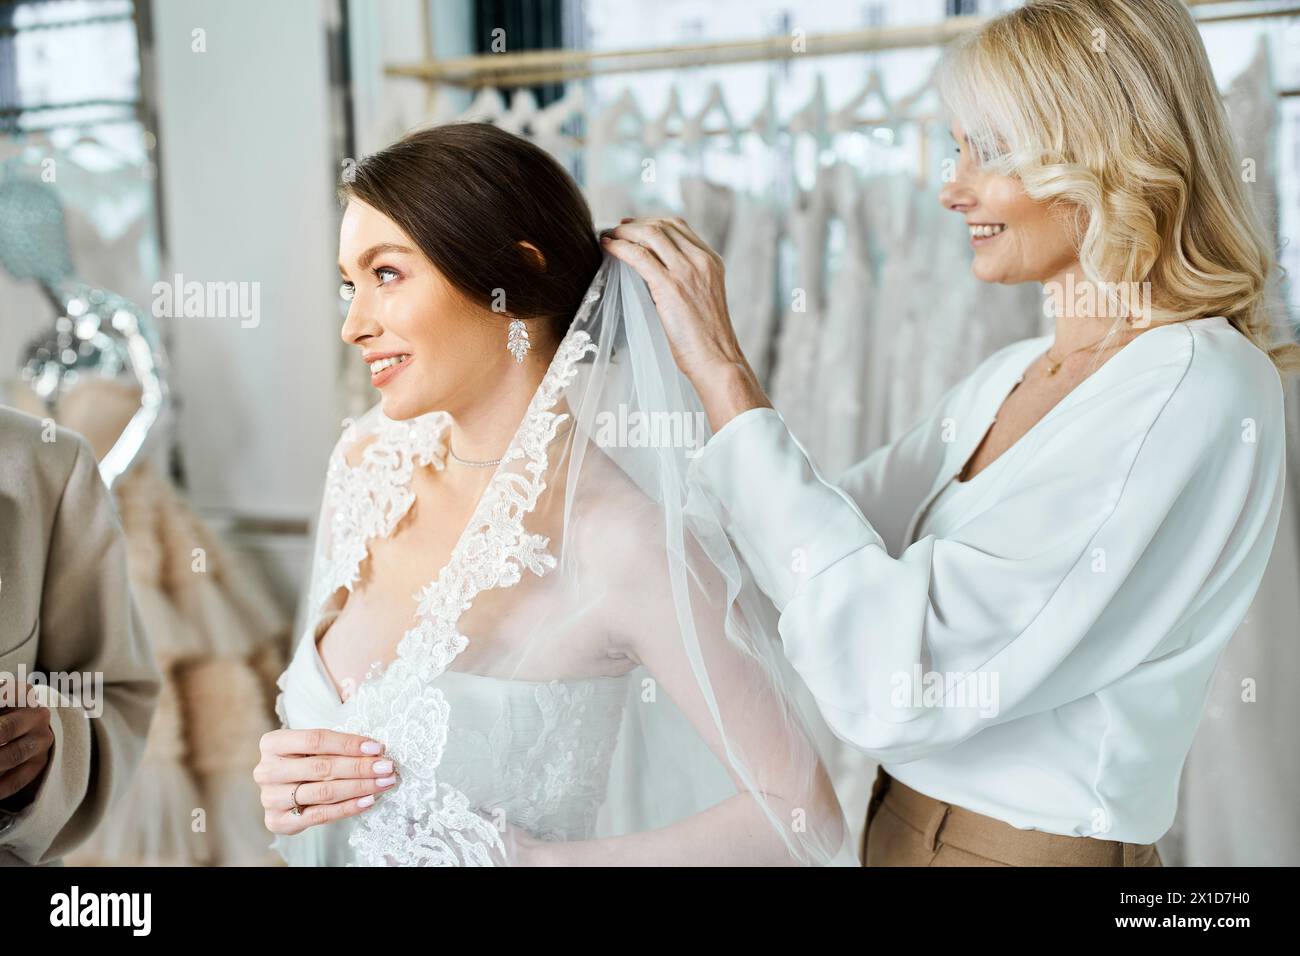 young bride in a white gown, and the other her mother, stand near a rack of dresses in a bridal salon. Stock Photo